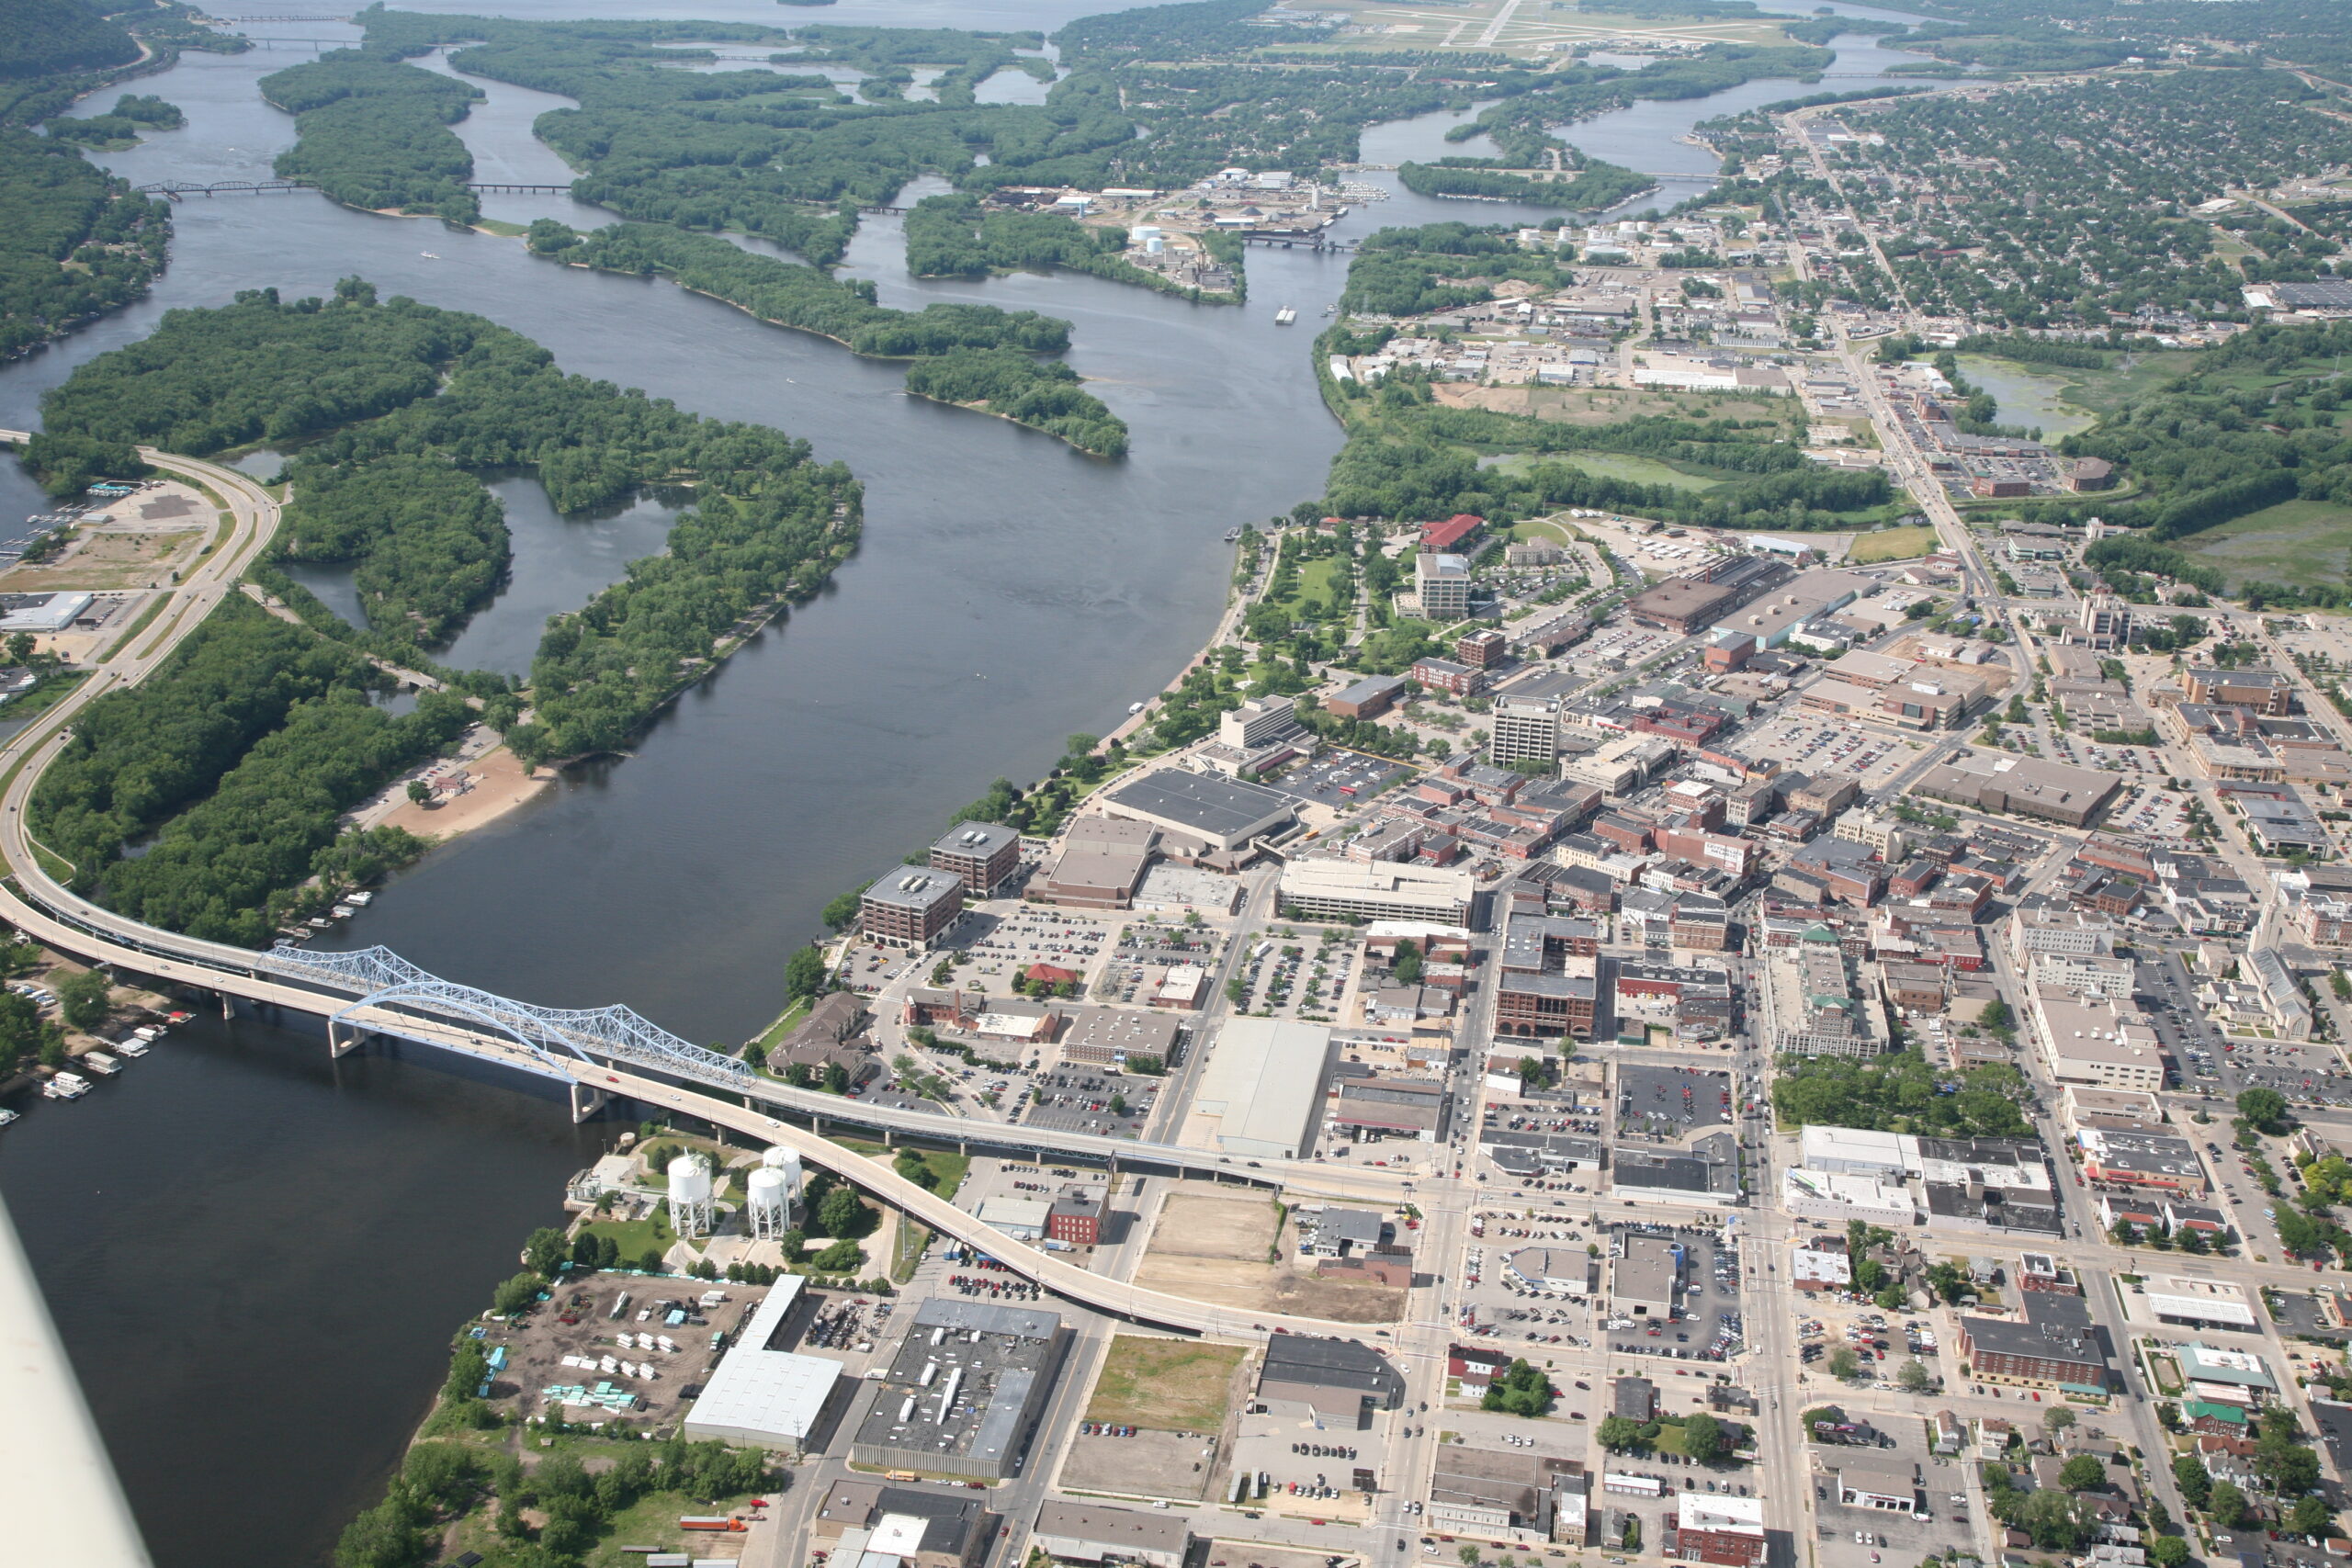 Featured image for the project, Developing strategies for mitigating heat islands in La Crosse, WI